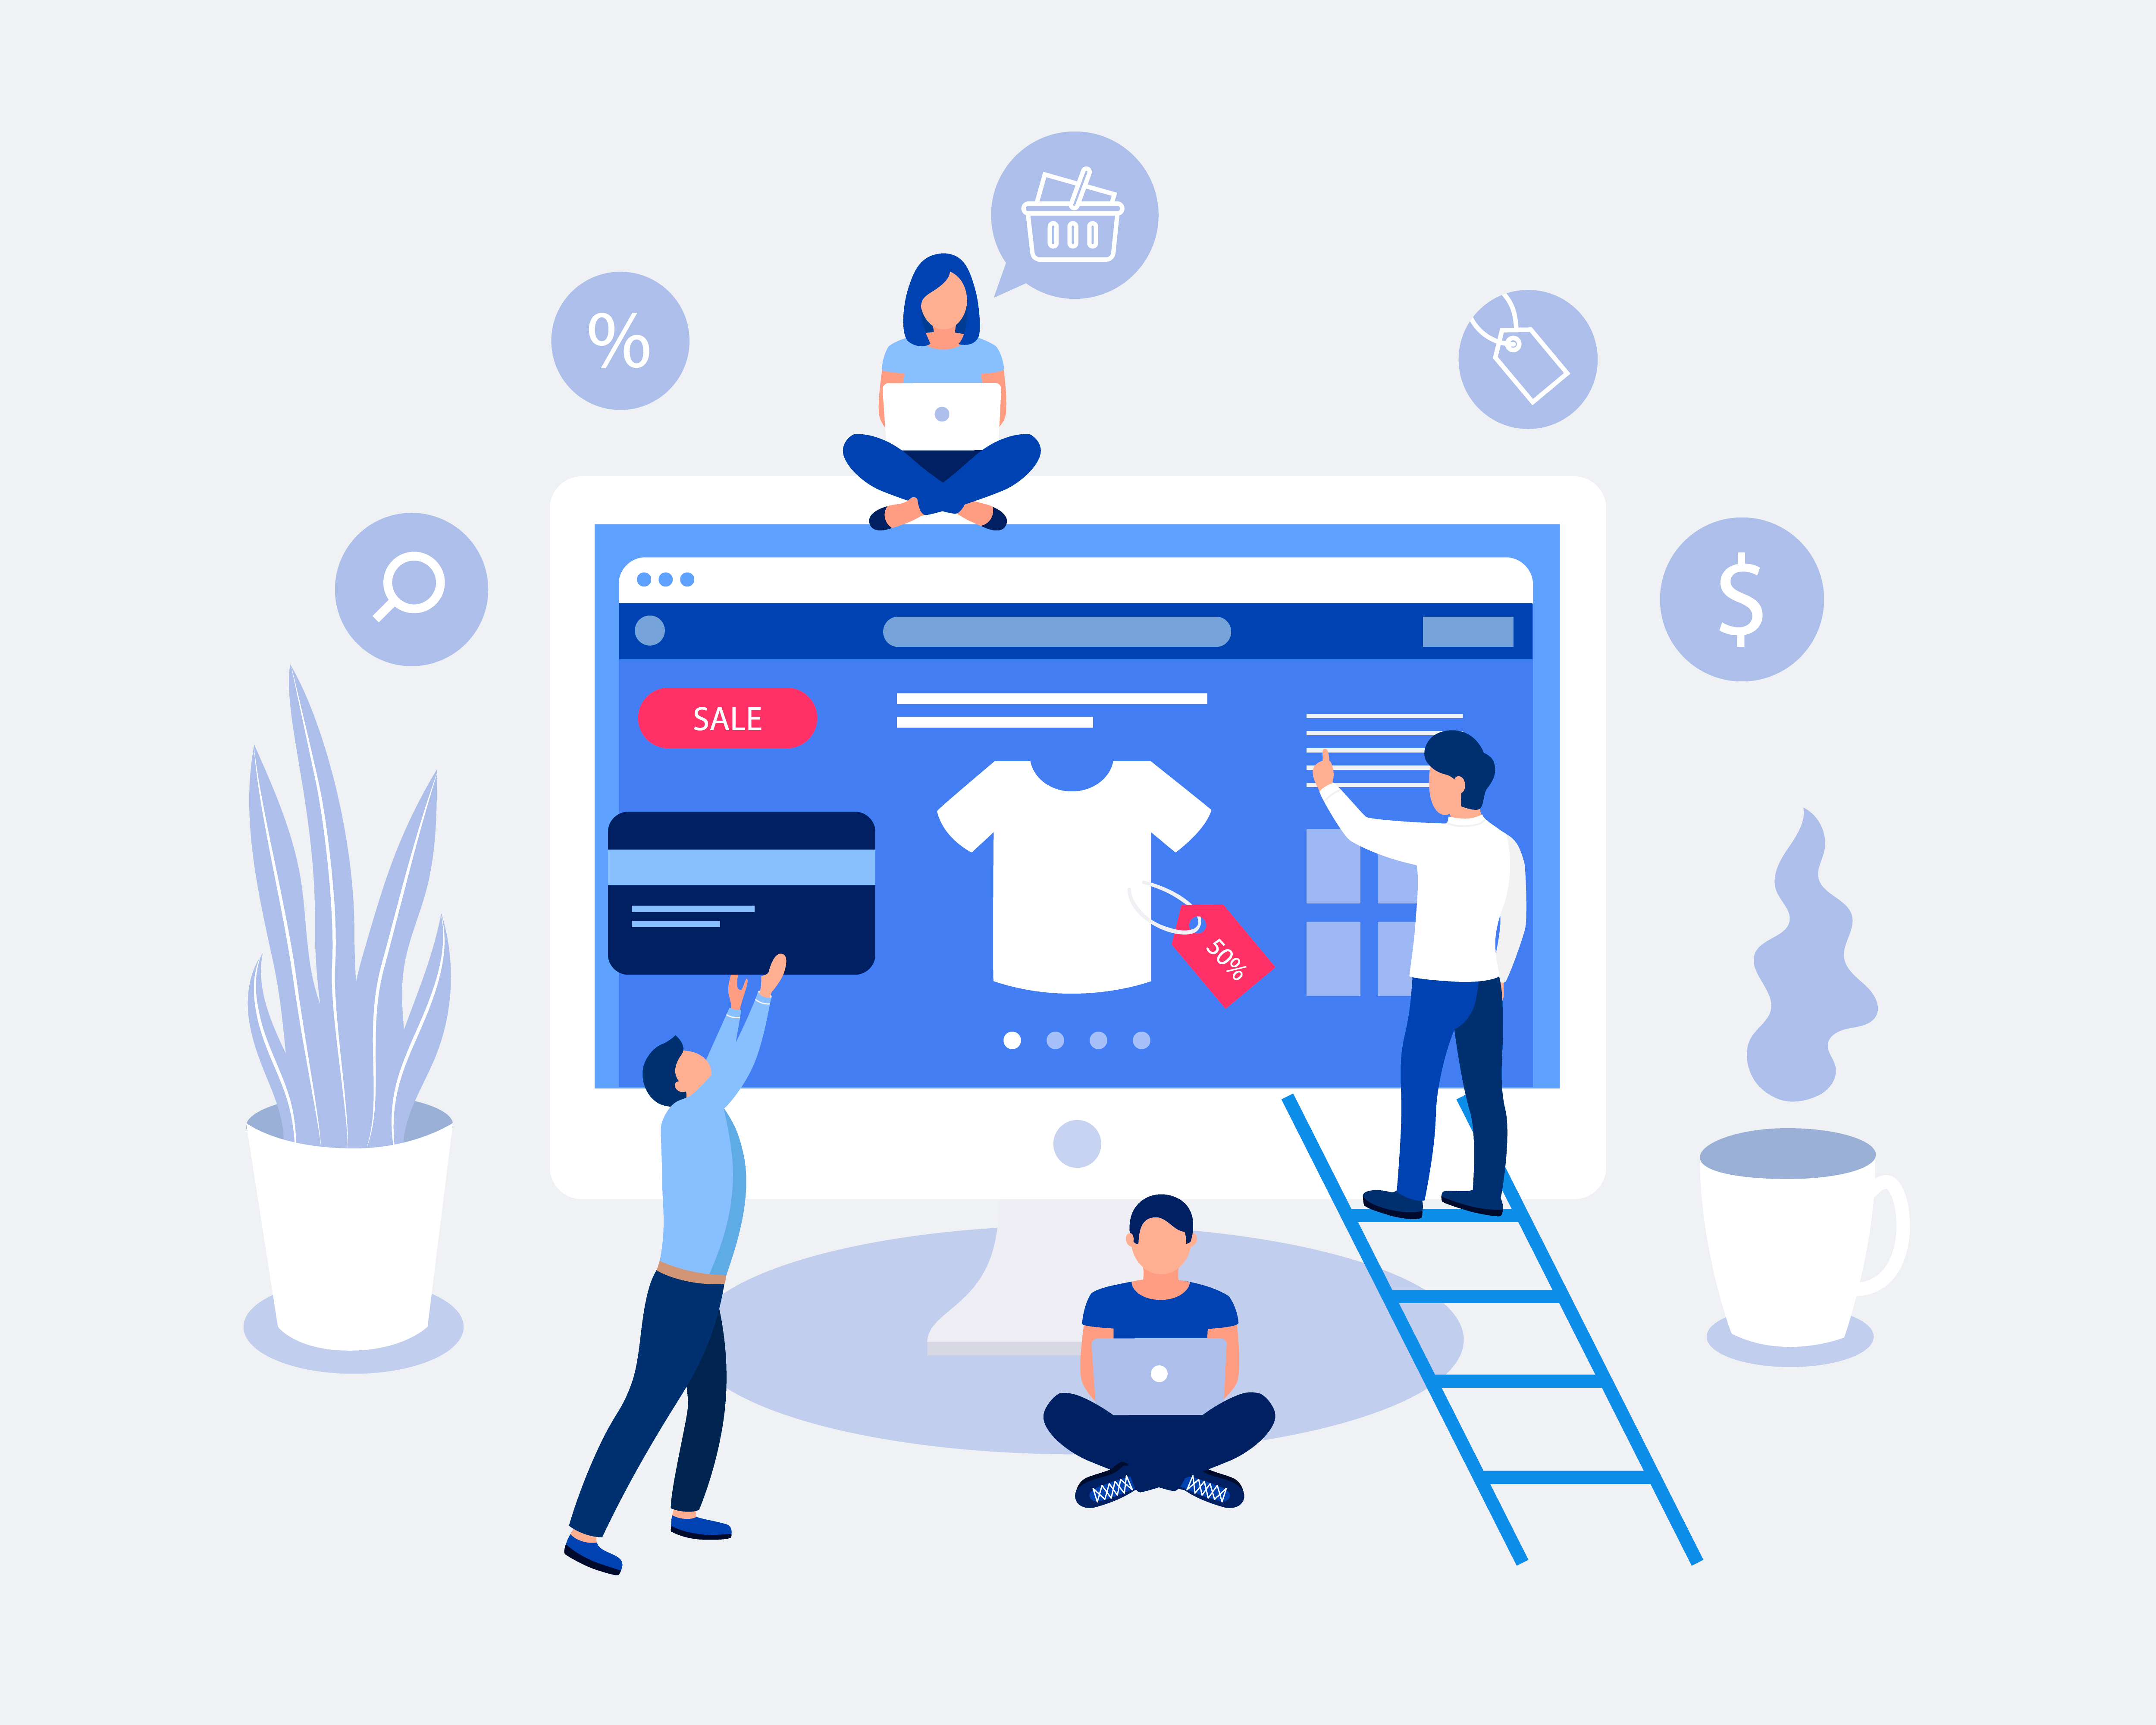 How To Set Up An eCommerce Business